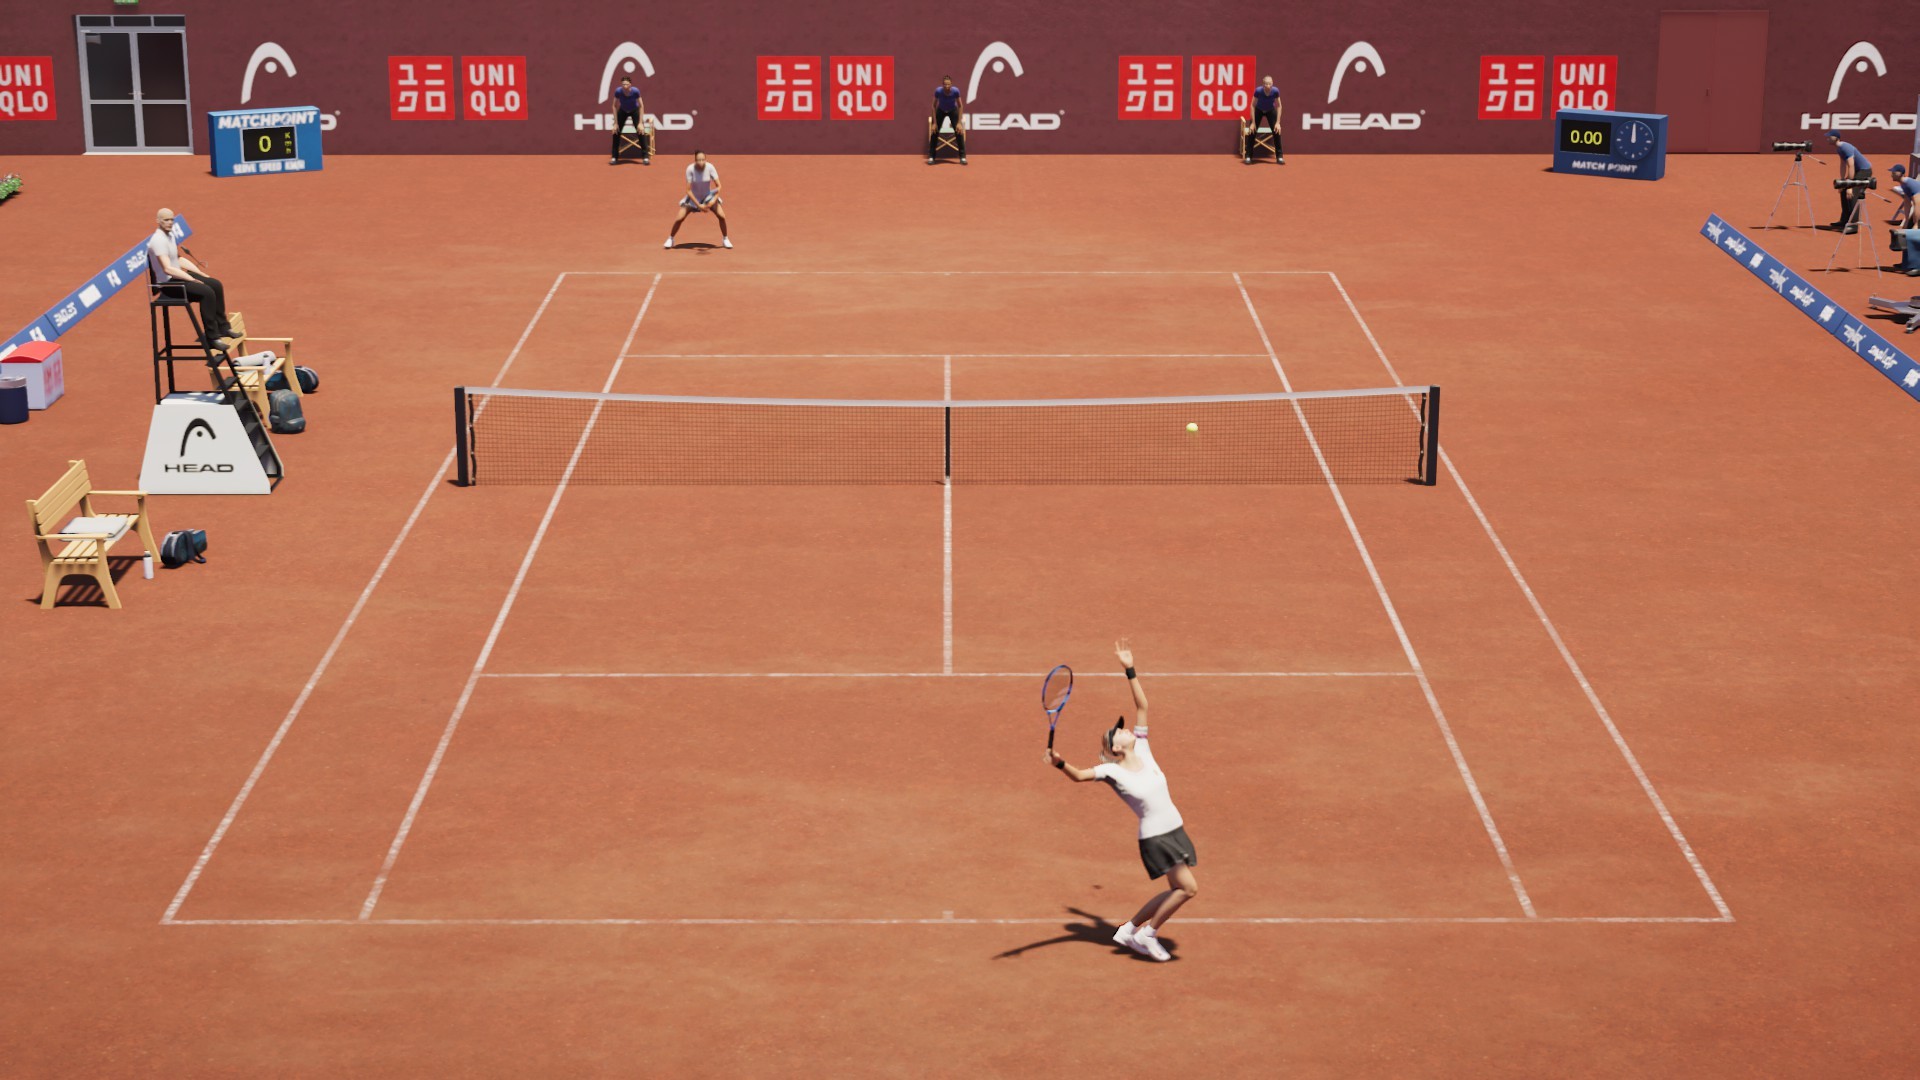 Matchpoint Tennis Championships demo